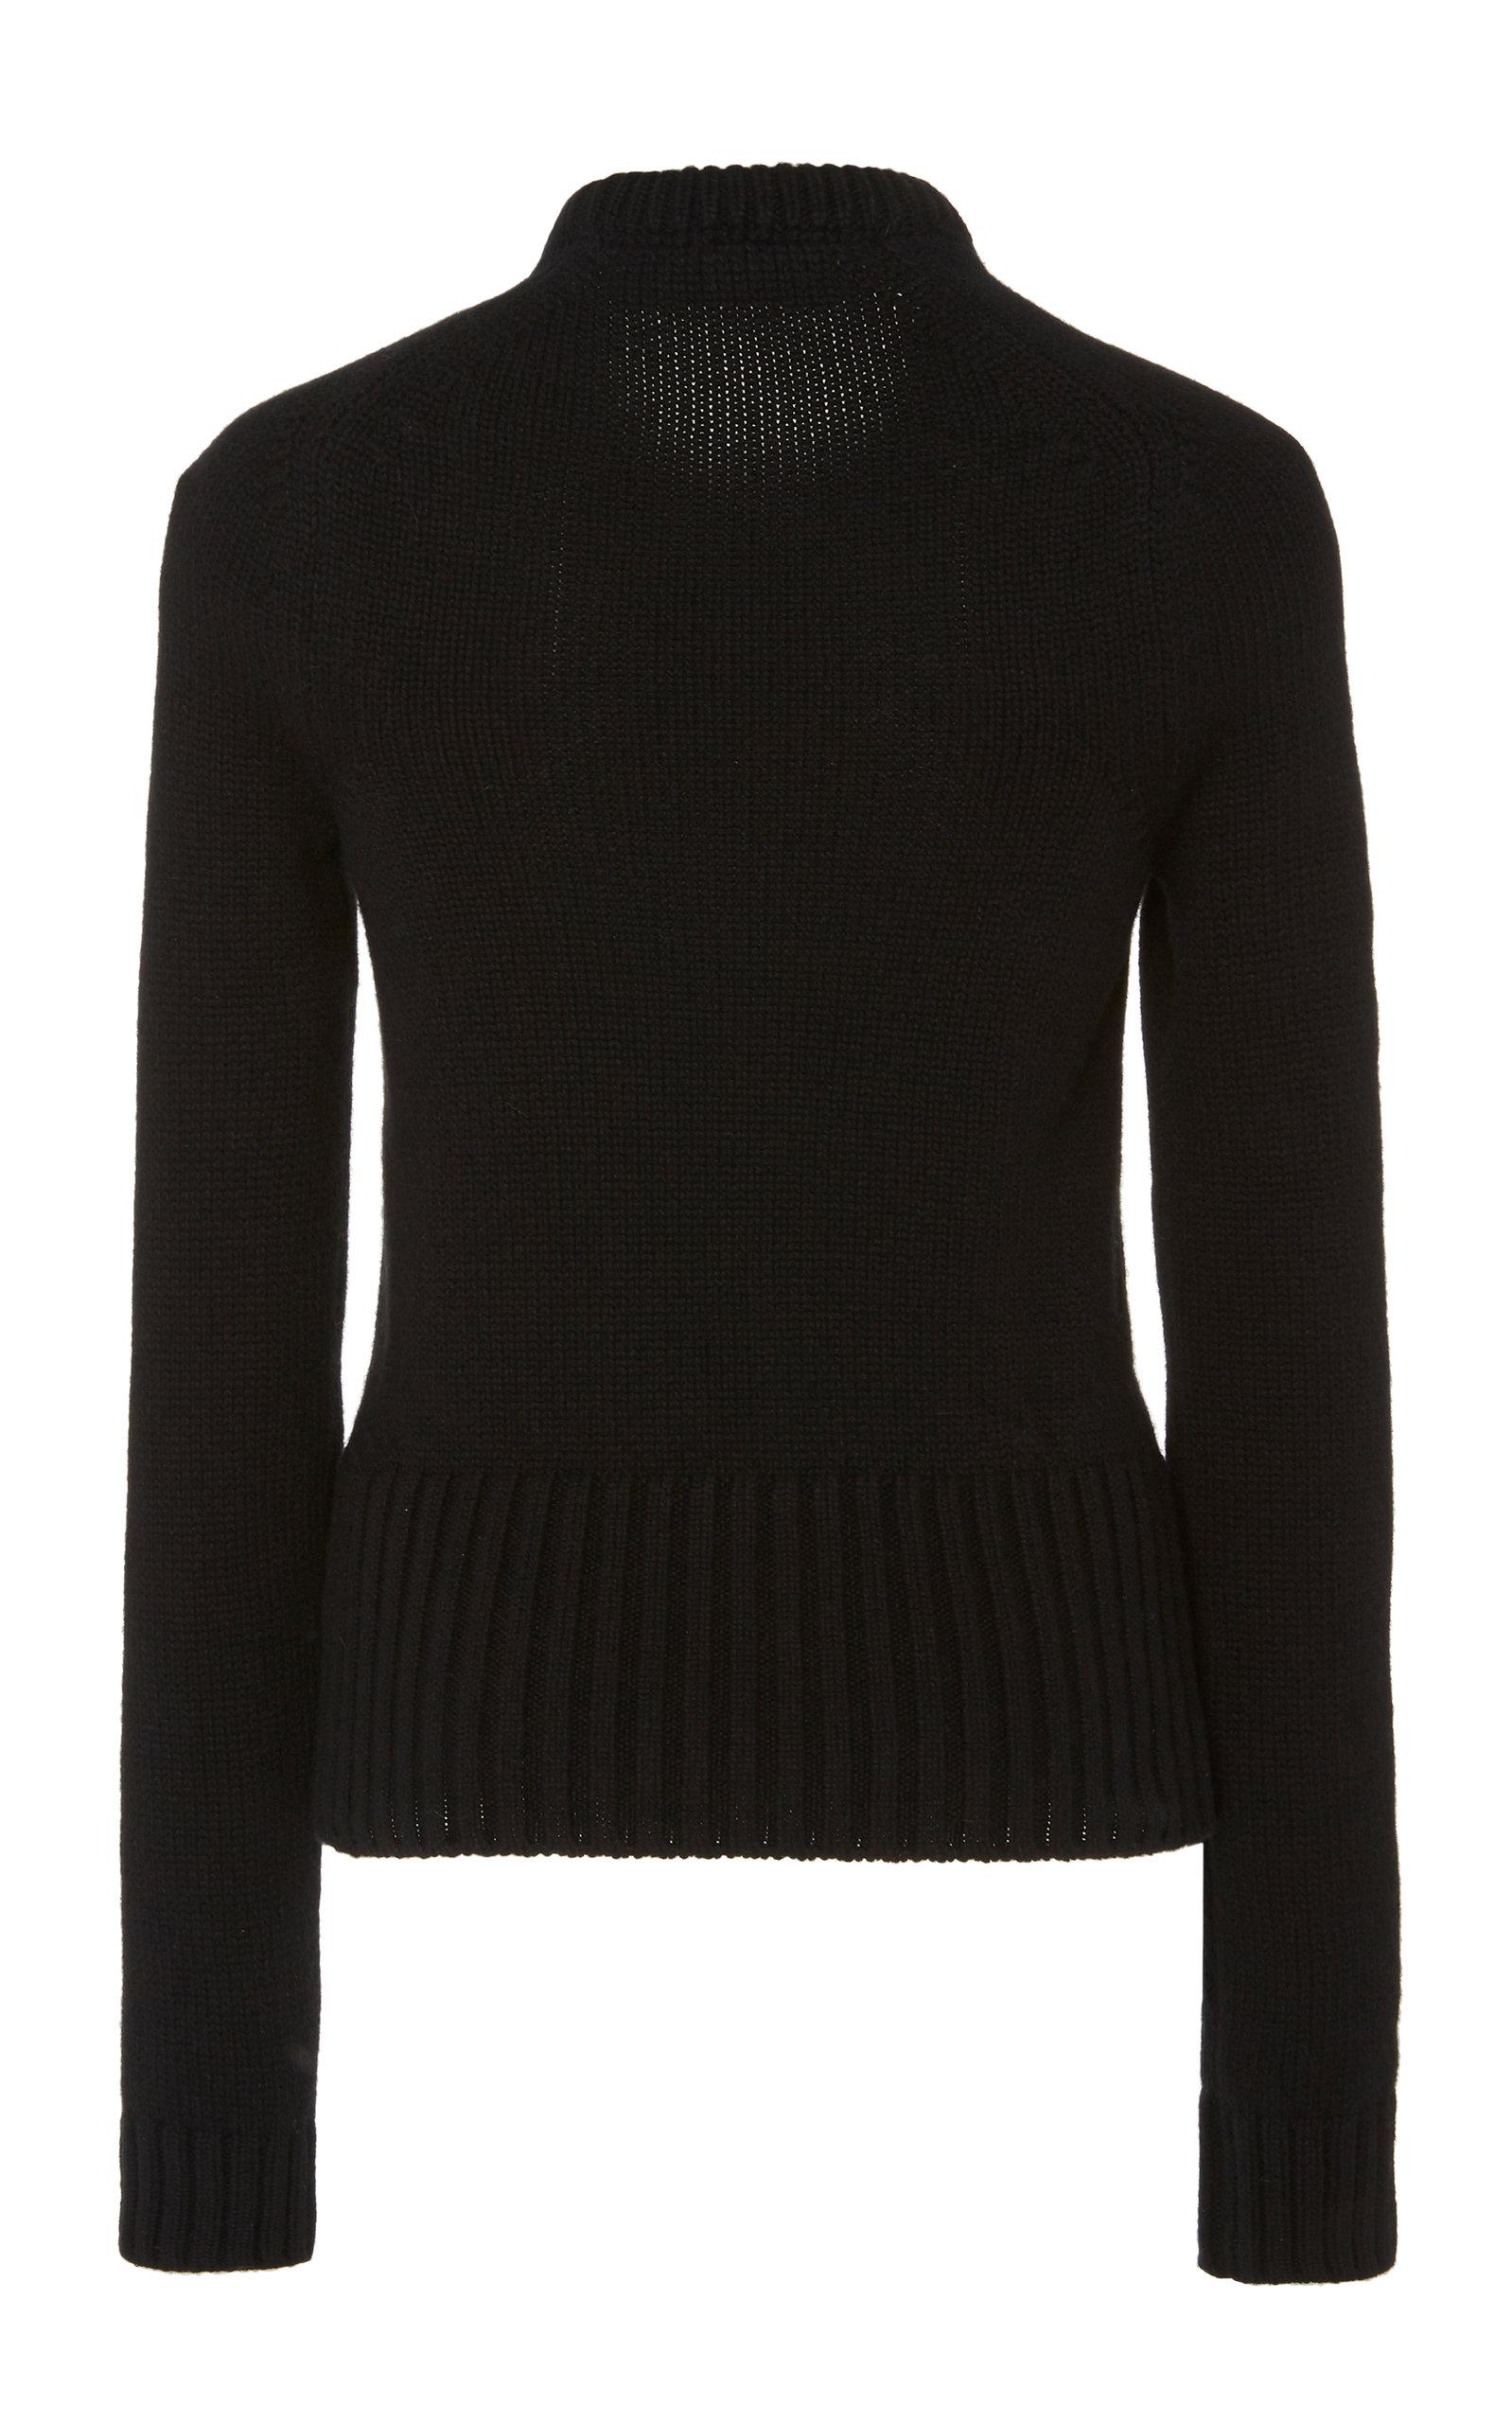 Michael Kors Monogrammed Cashmere Sweater in Black - Lyst